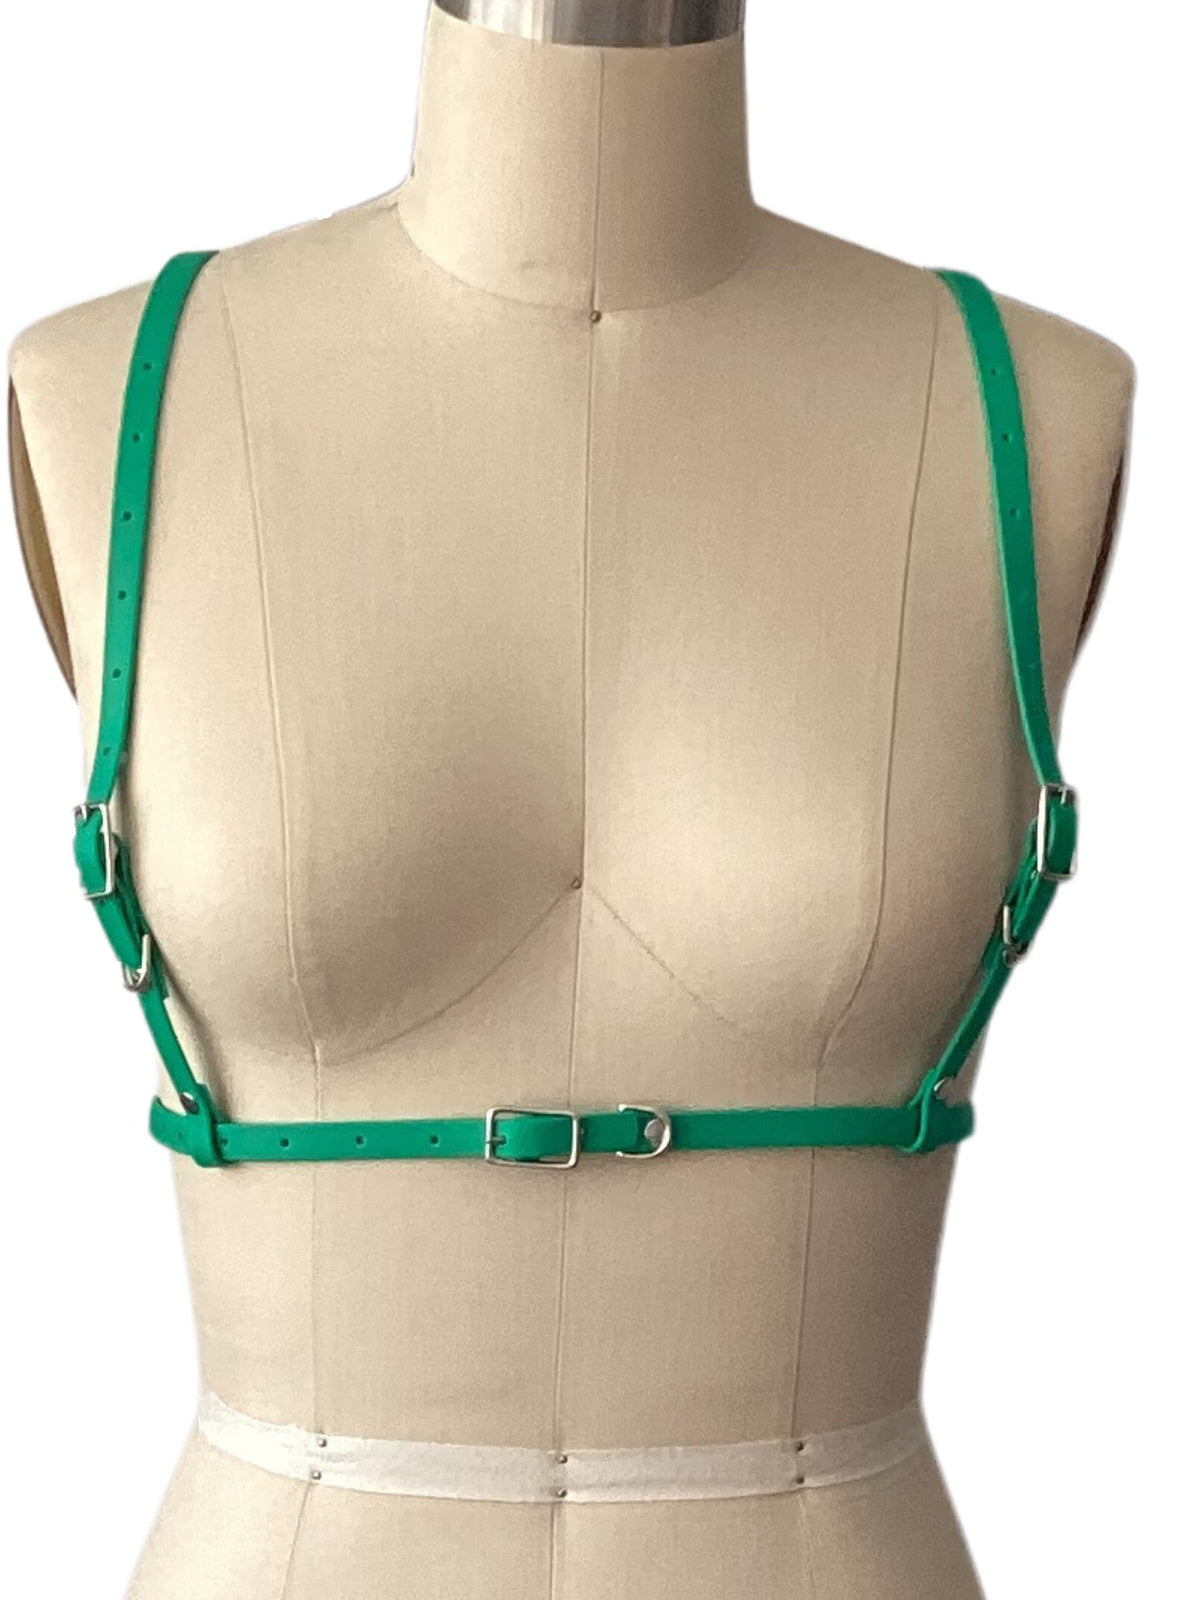 Emerald Green Angle Grinder Harness